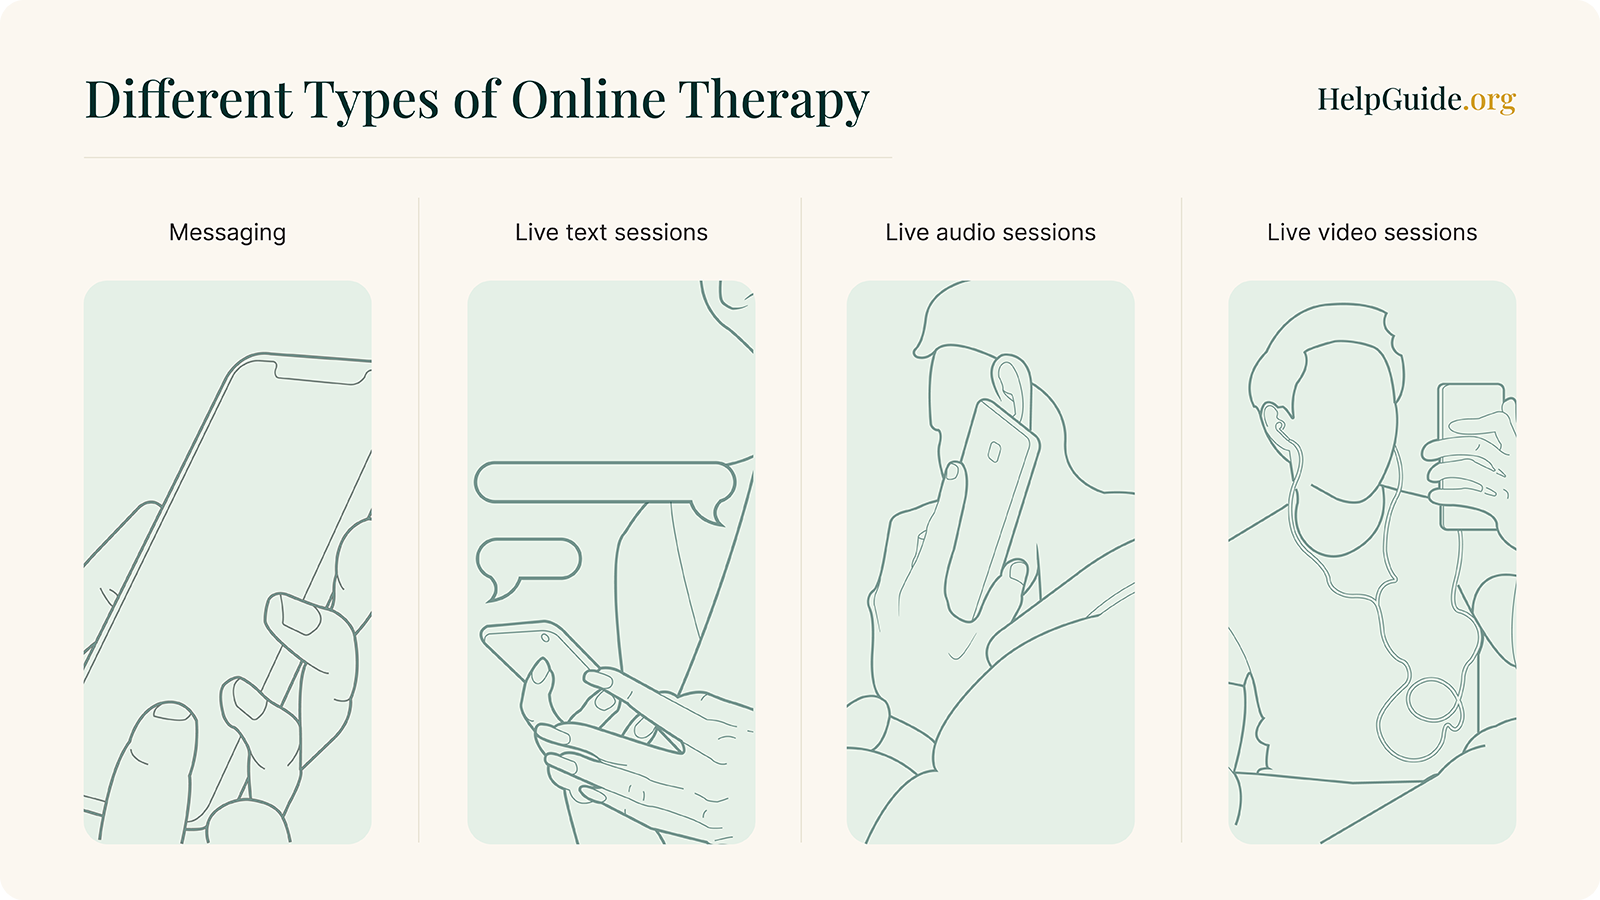 An infographic showing the four different types of online therapy: messaging, live text sessions, live audio sessions, and live video sessions.